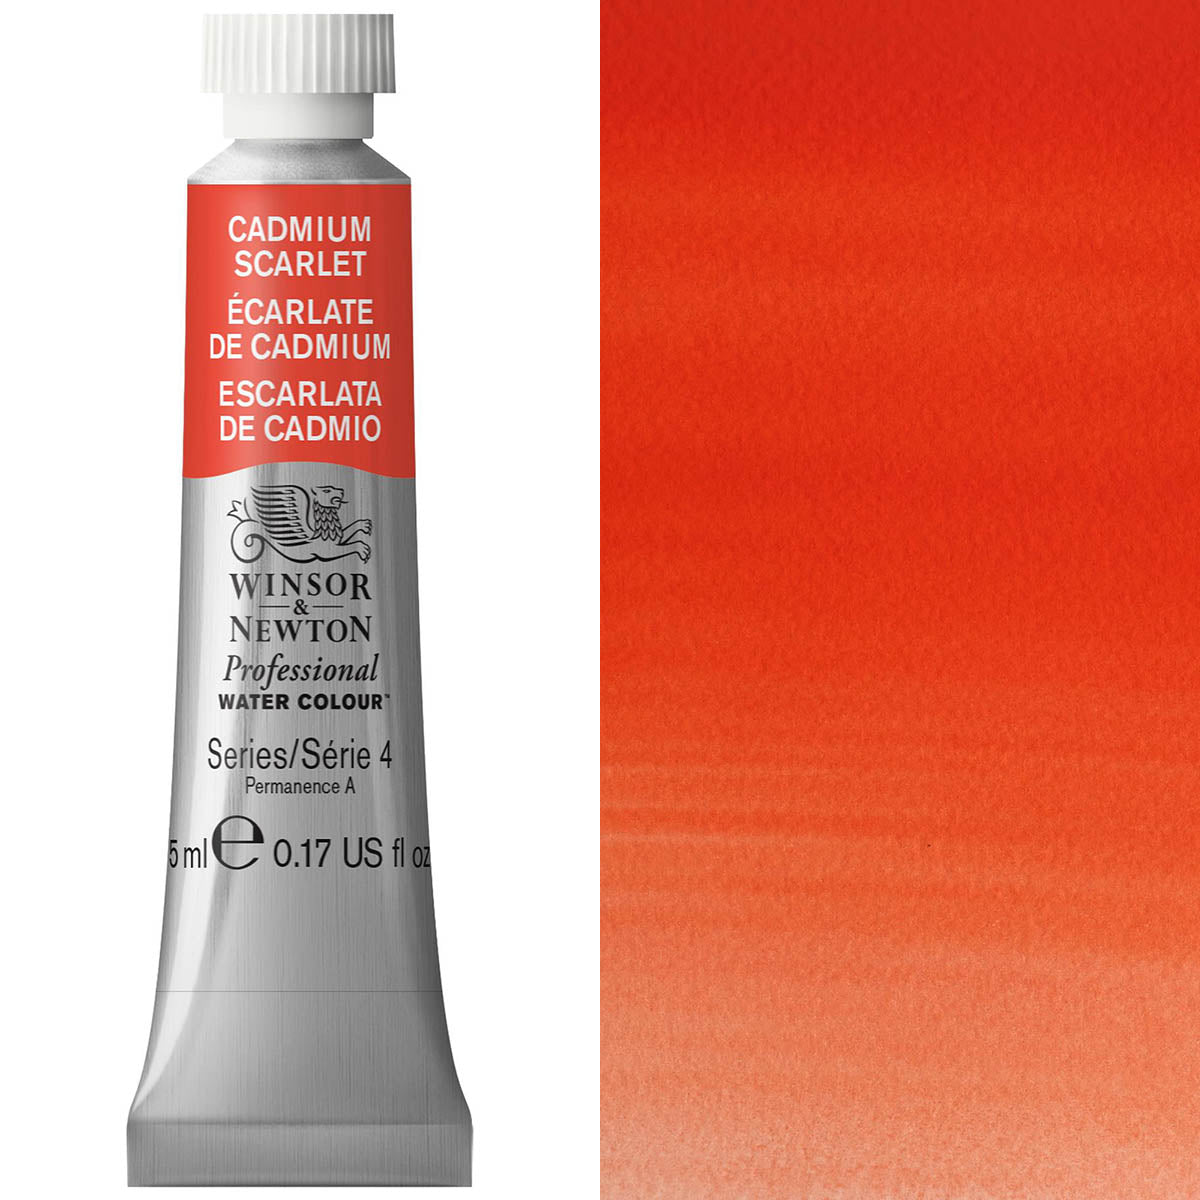 Winsor and Newton - Professional Artists' Watercolour - 5ml - Cadmium Scarlet